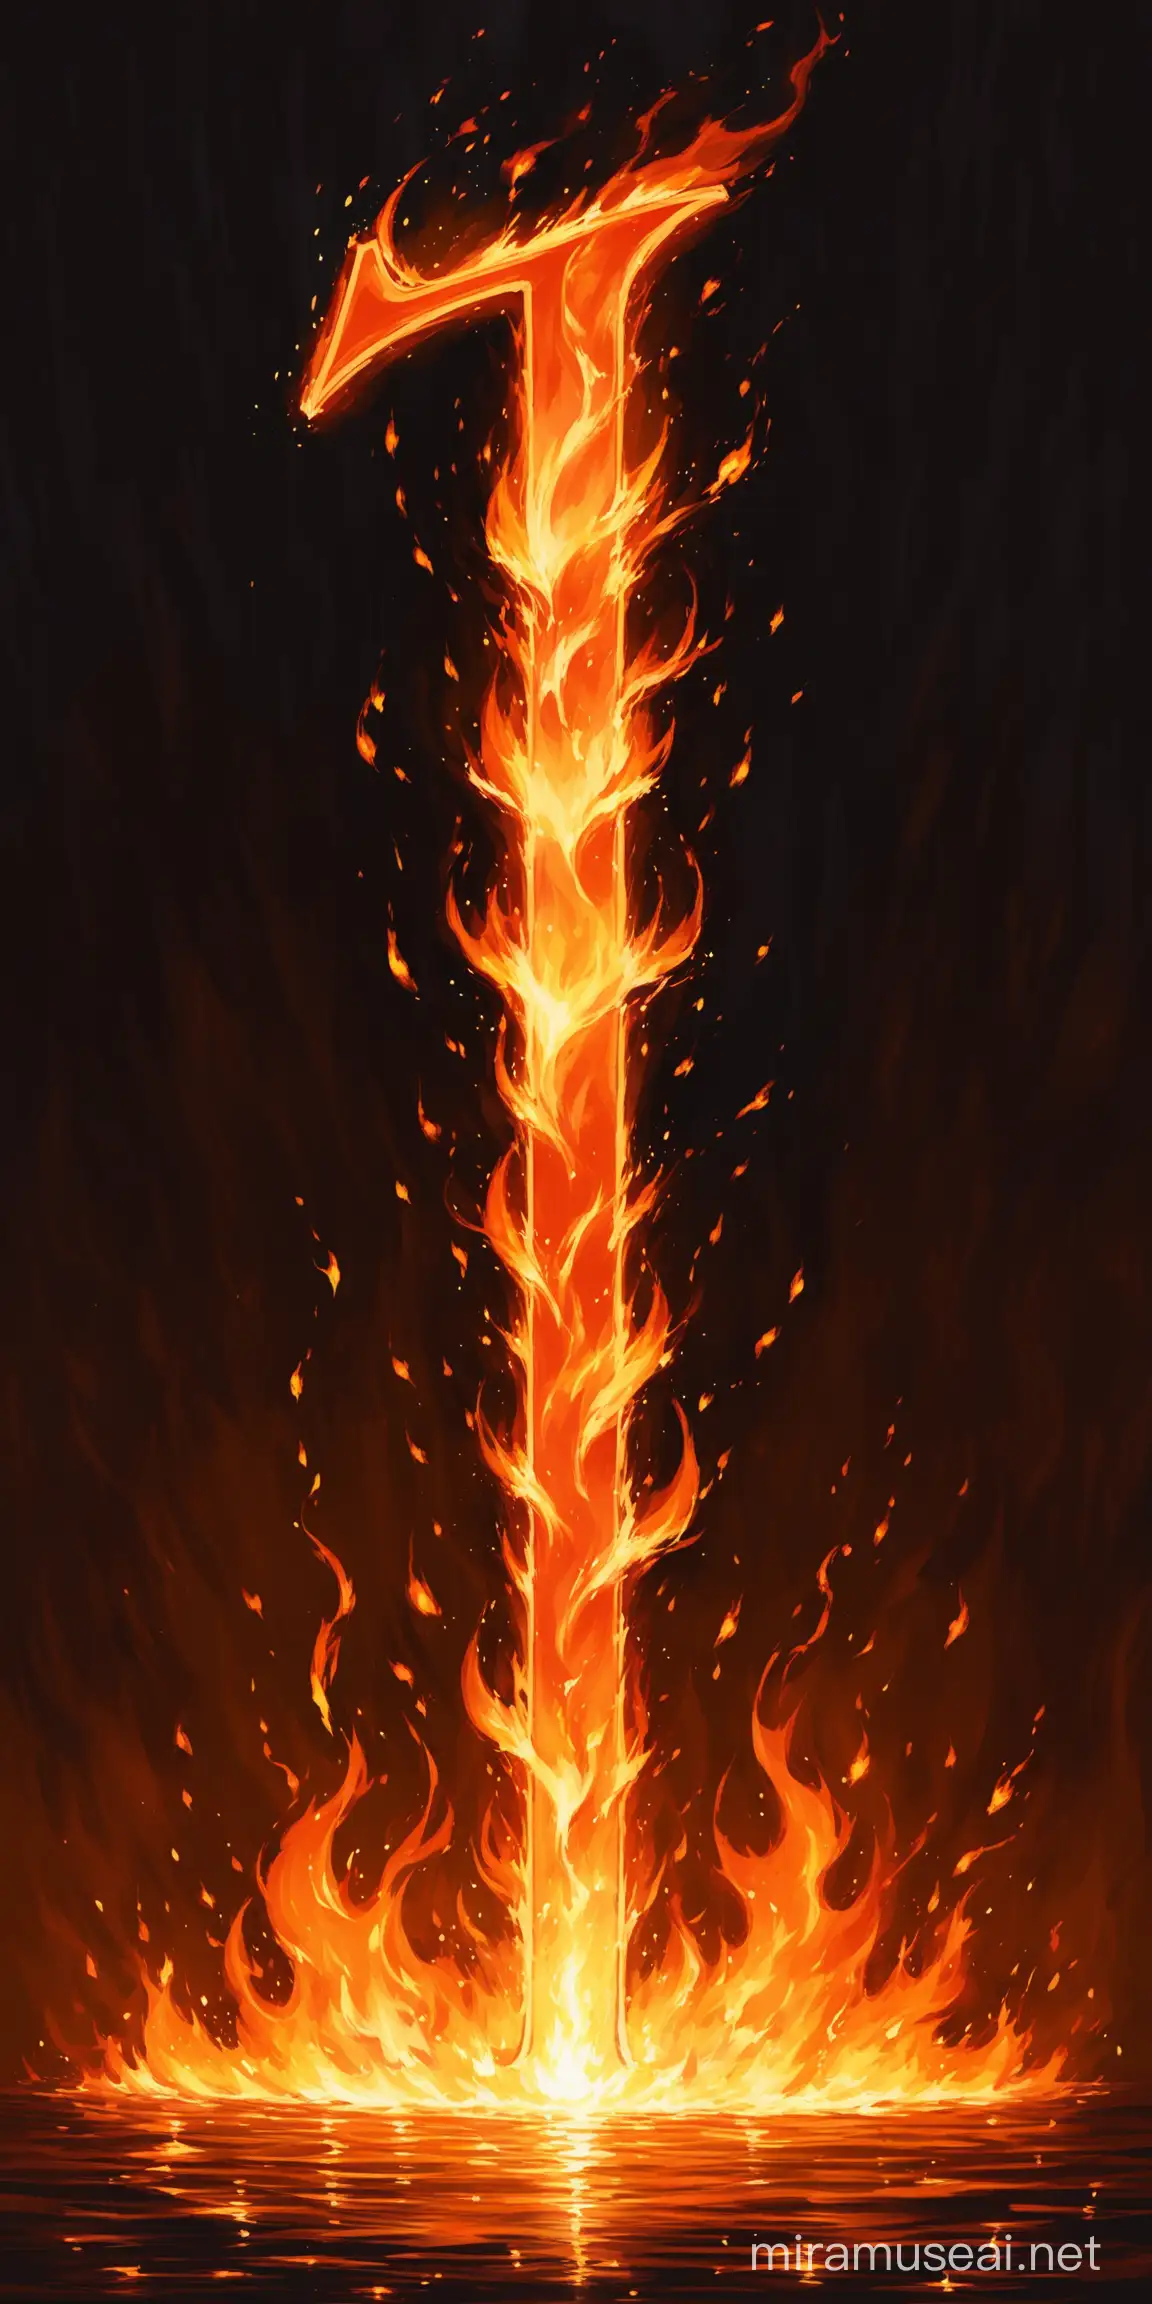 Burning Letter I Illustration Fiery Flames Consuming Alphabet Character